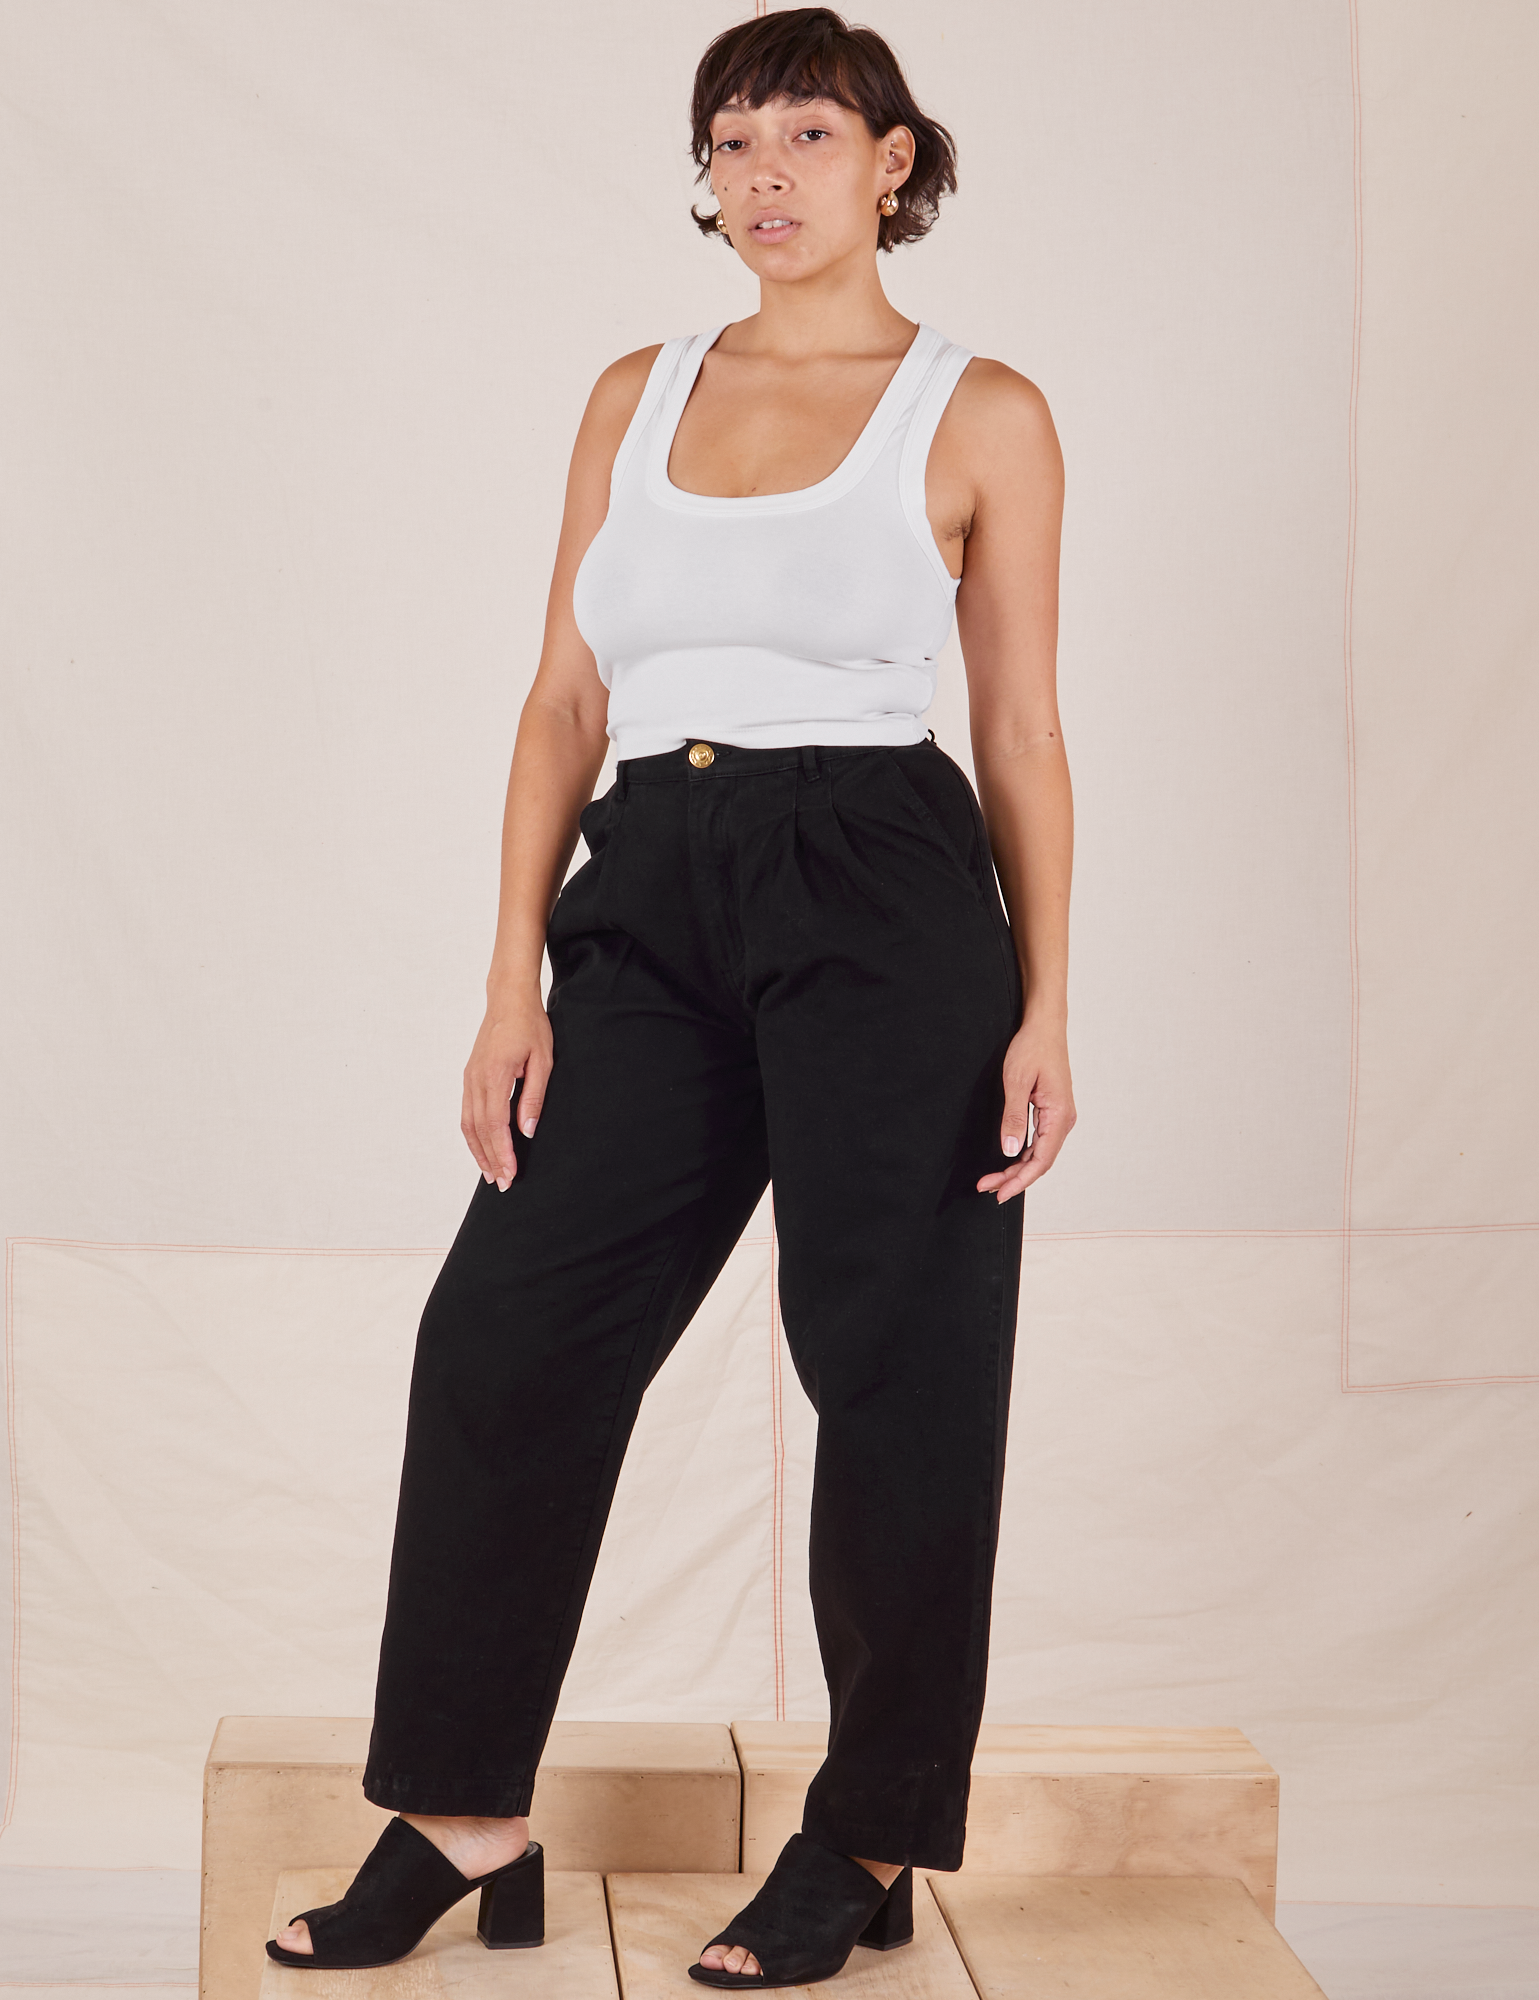 Tiara is 5&#39;4&quot; and wearing S Heavyweight Trousers in Basic Black paired with Cropped Tank Top in vintage tee off-white